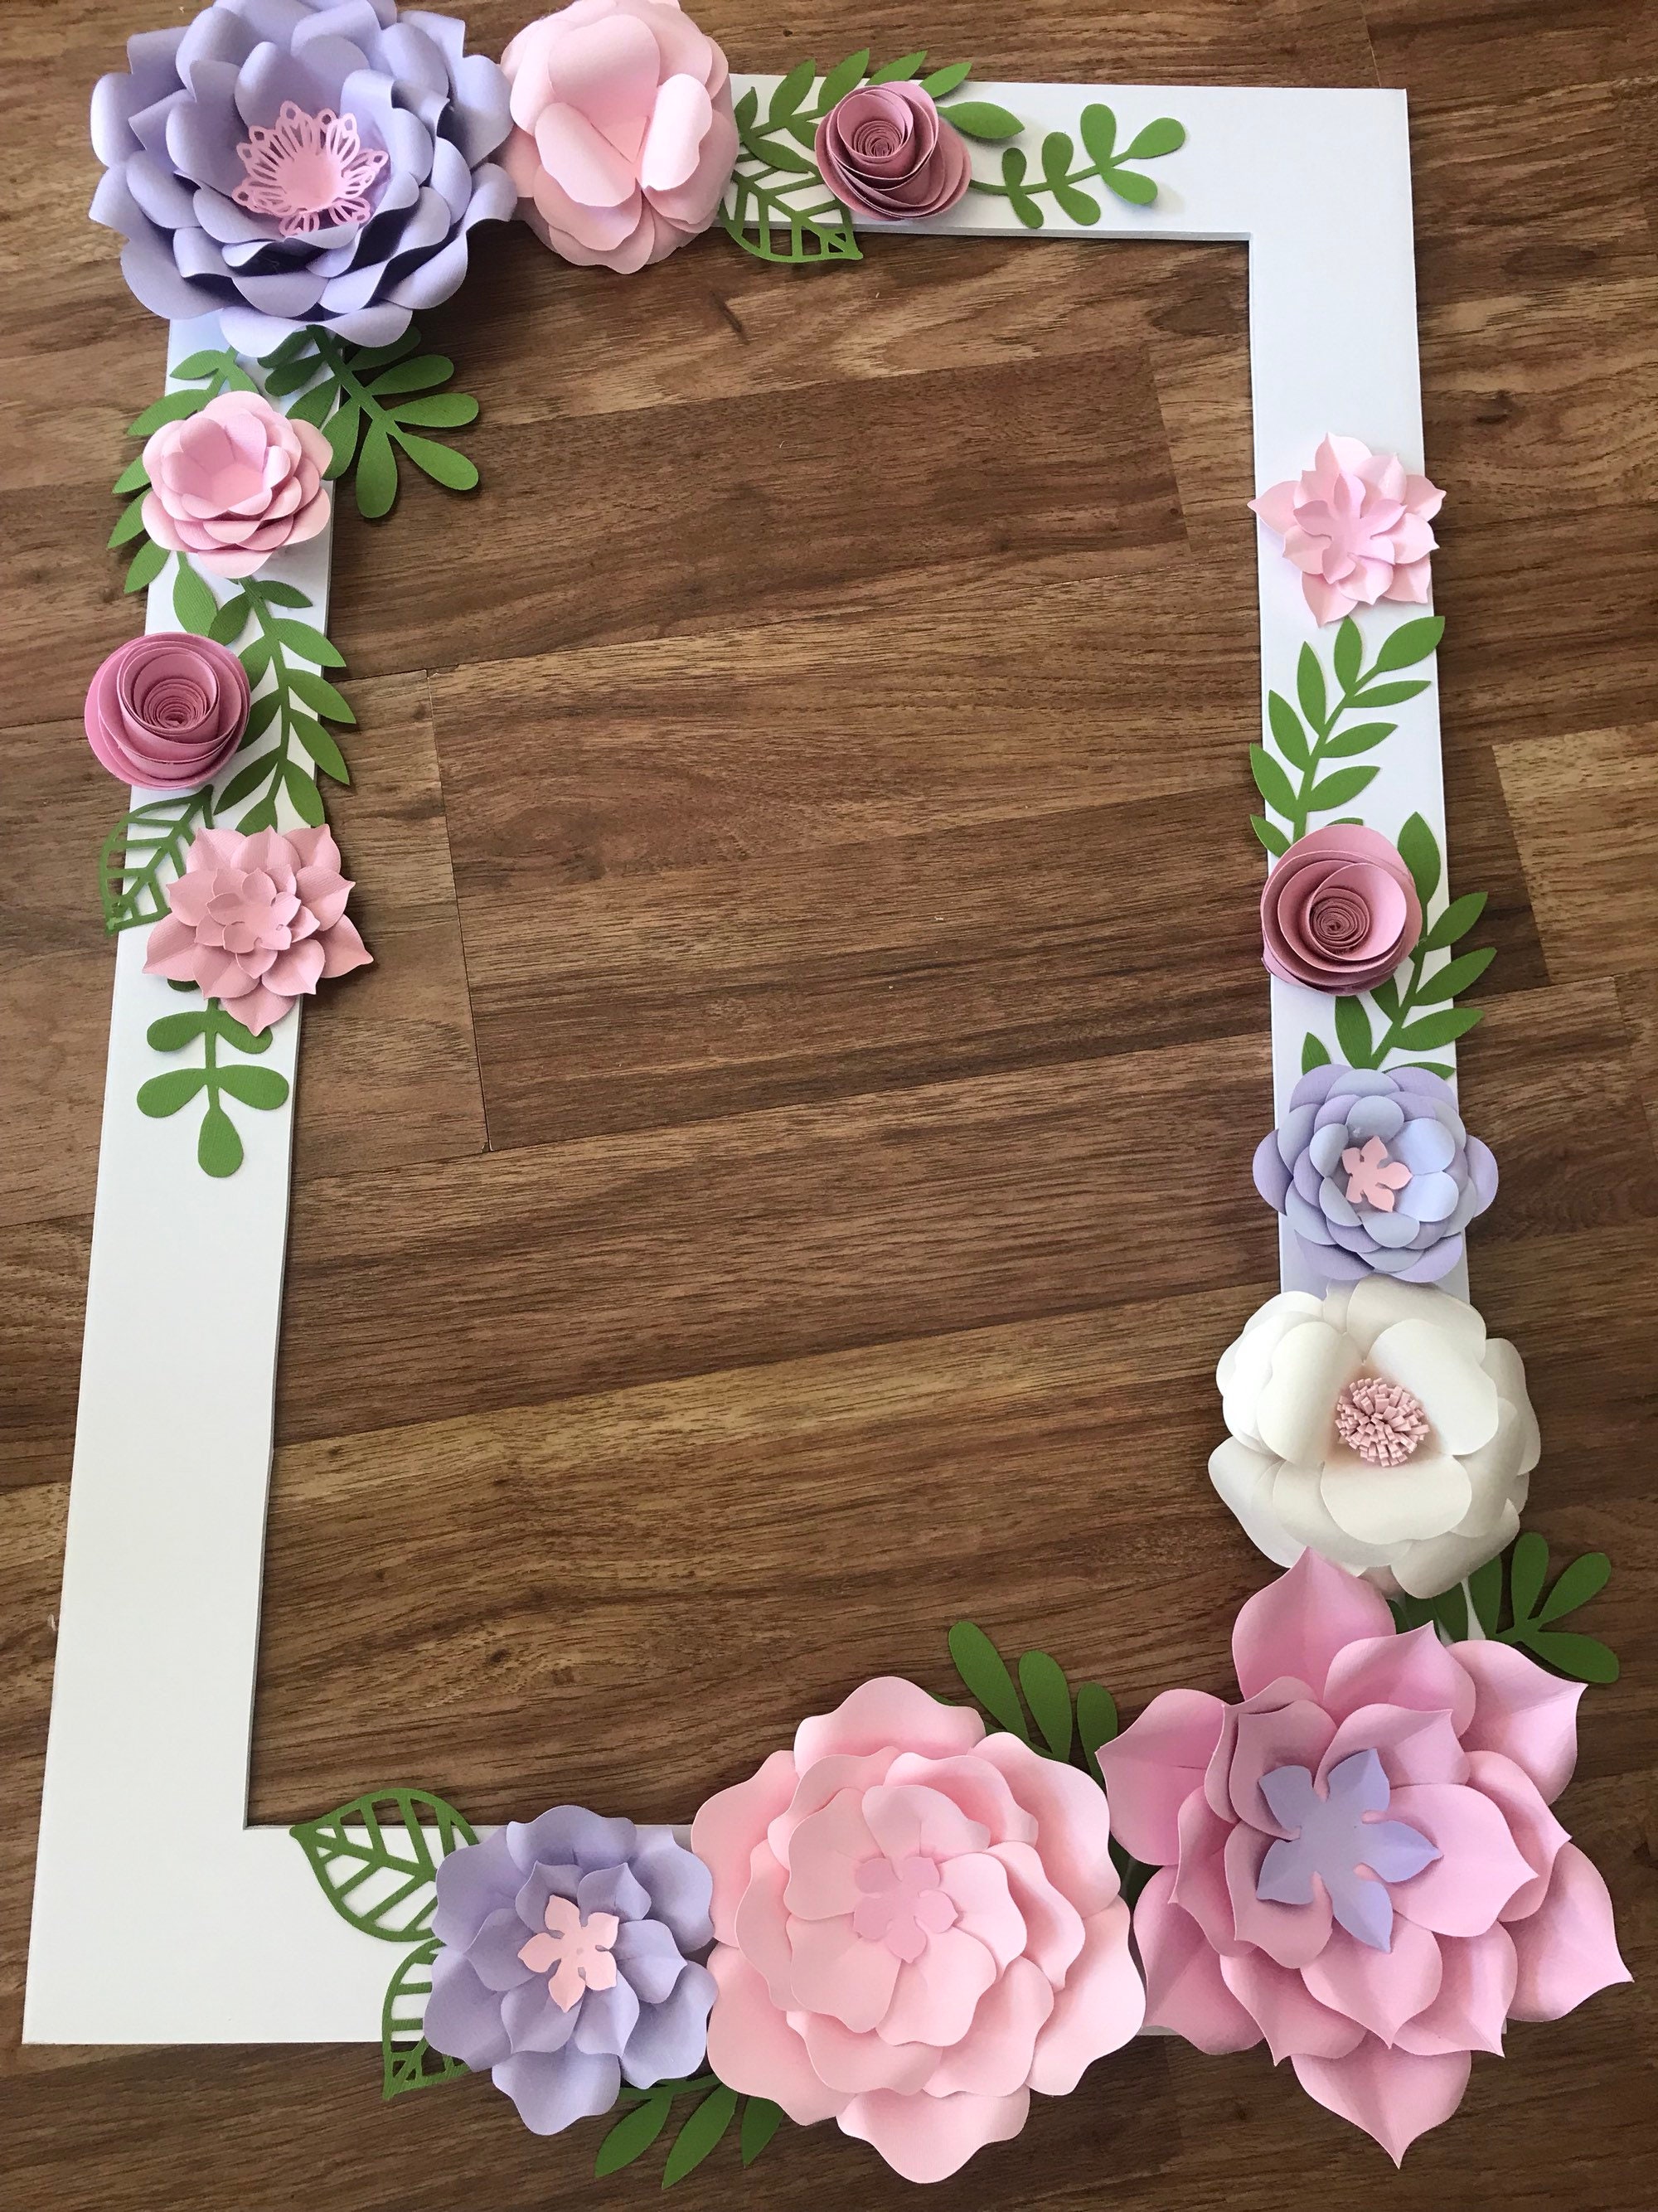 Floral Photo Booth Frame/wedding/birthday Party Selfie Frame Paper Flowers  Shower Party Decorations Birthday Floral Frame 